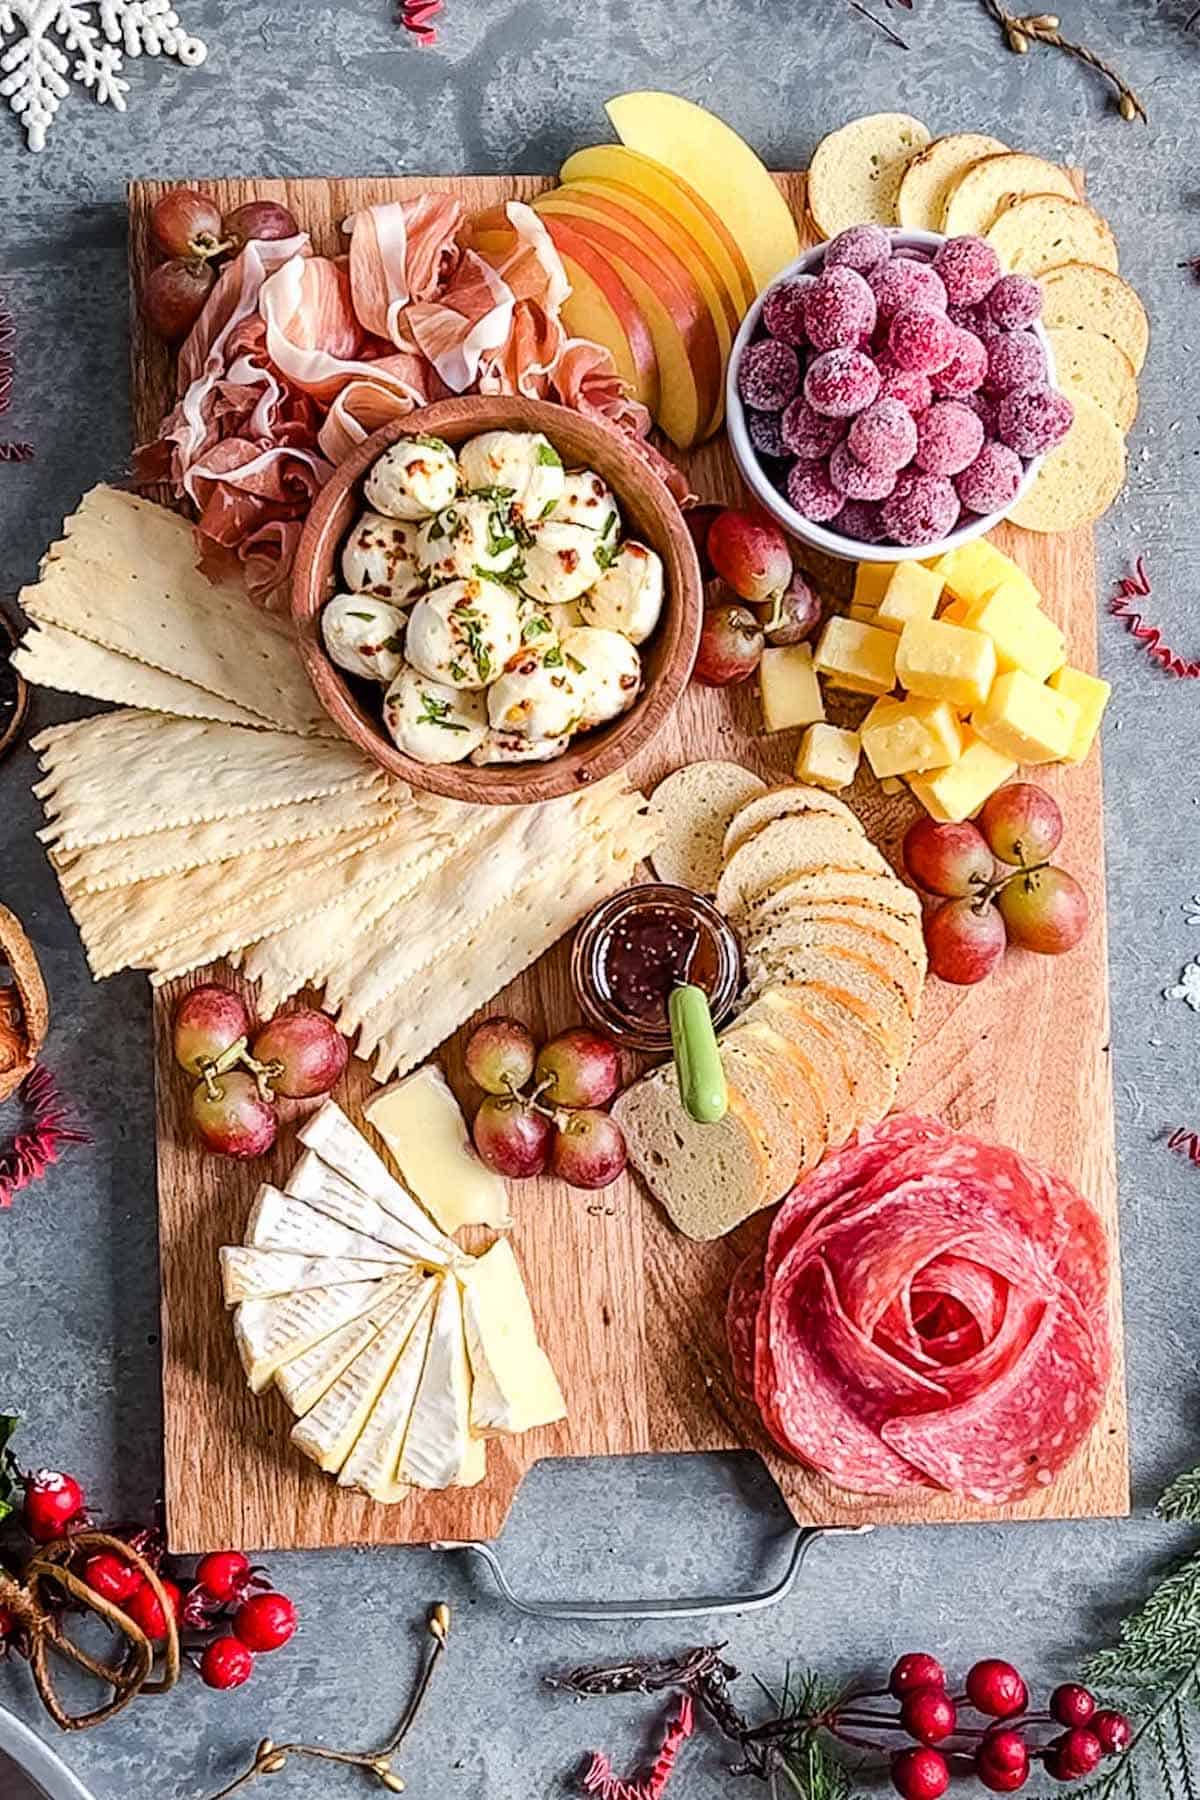 Christmas charcuterie board with 3 cheeses, salami rose, folded proscuitto, sugared cranberries, apple slices, and red grapes